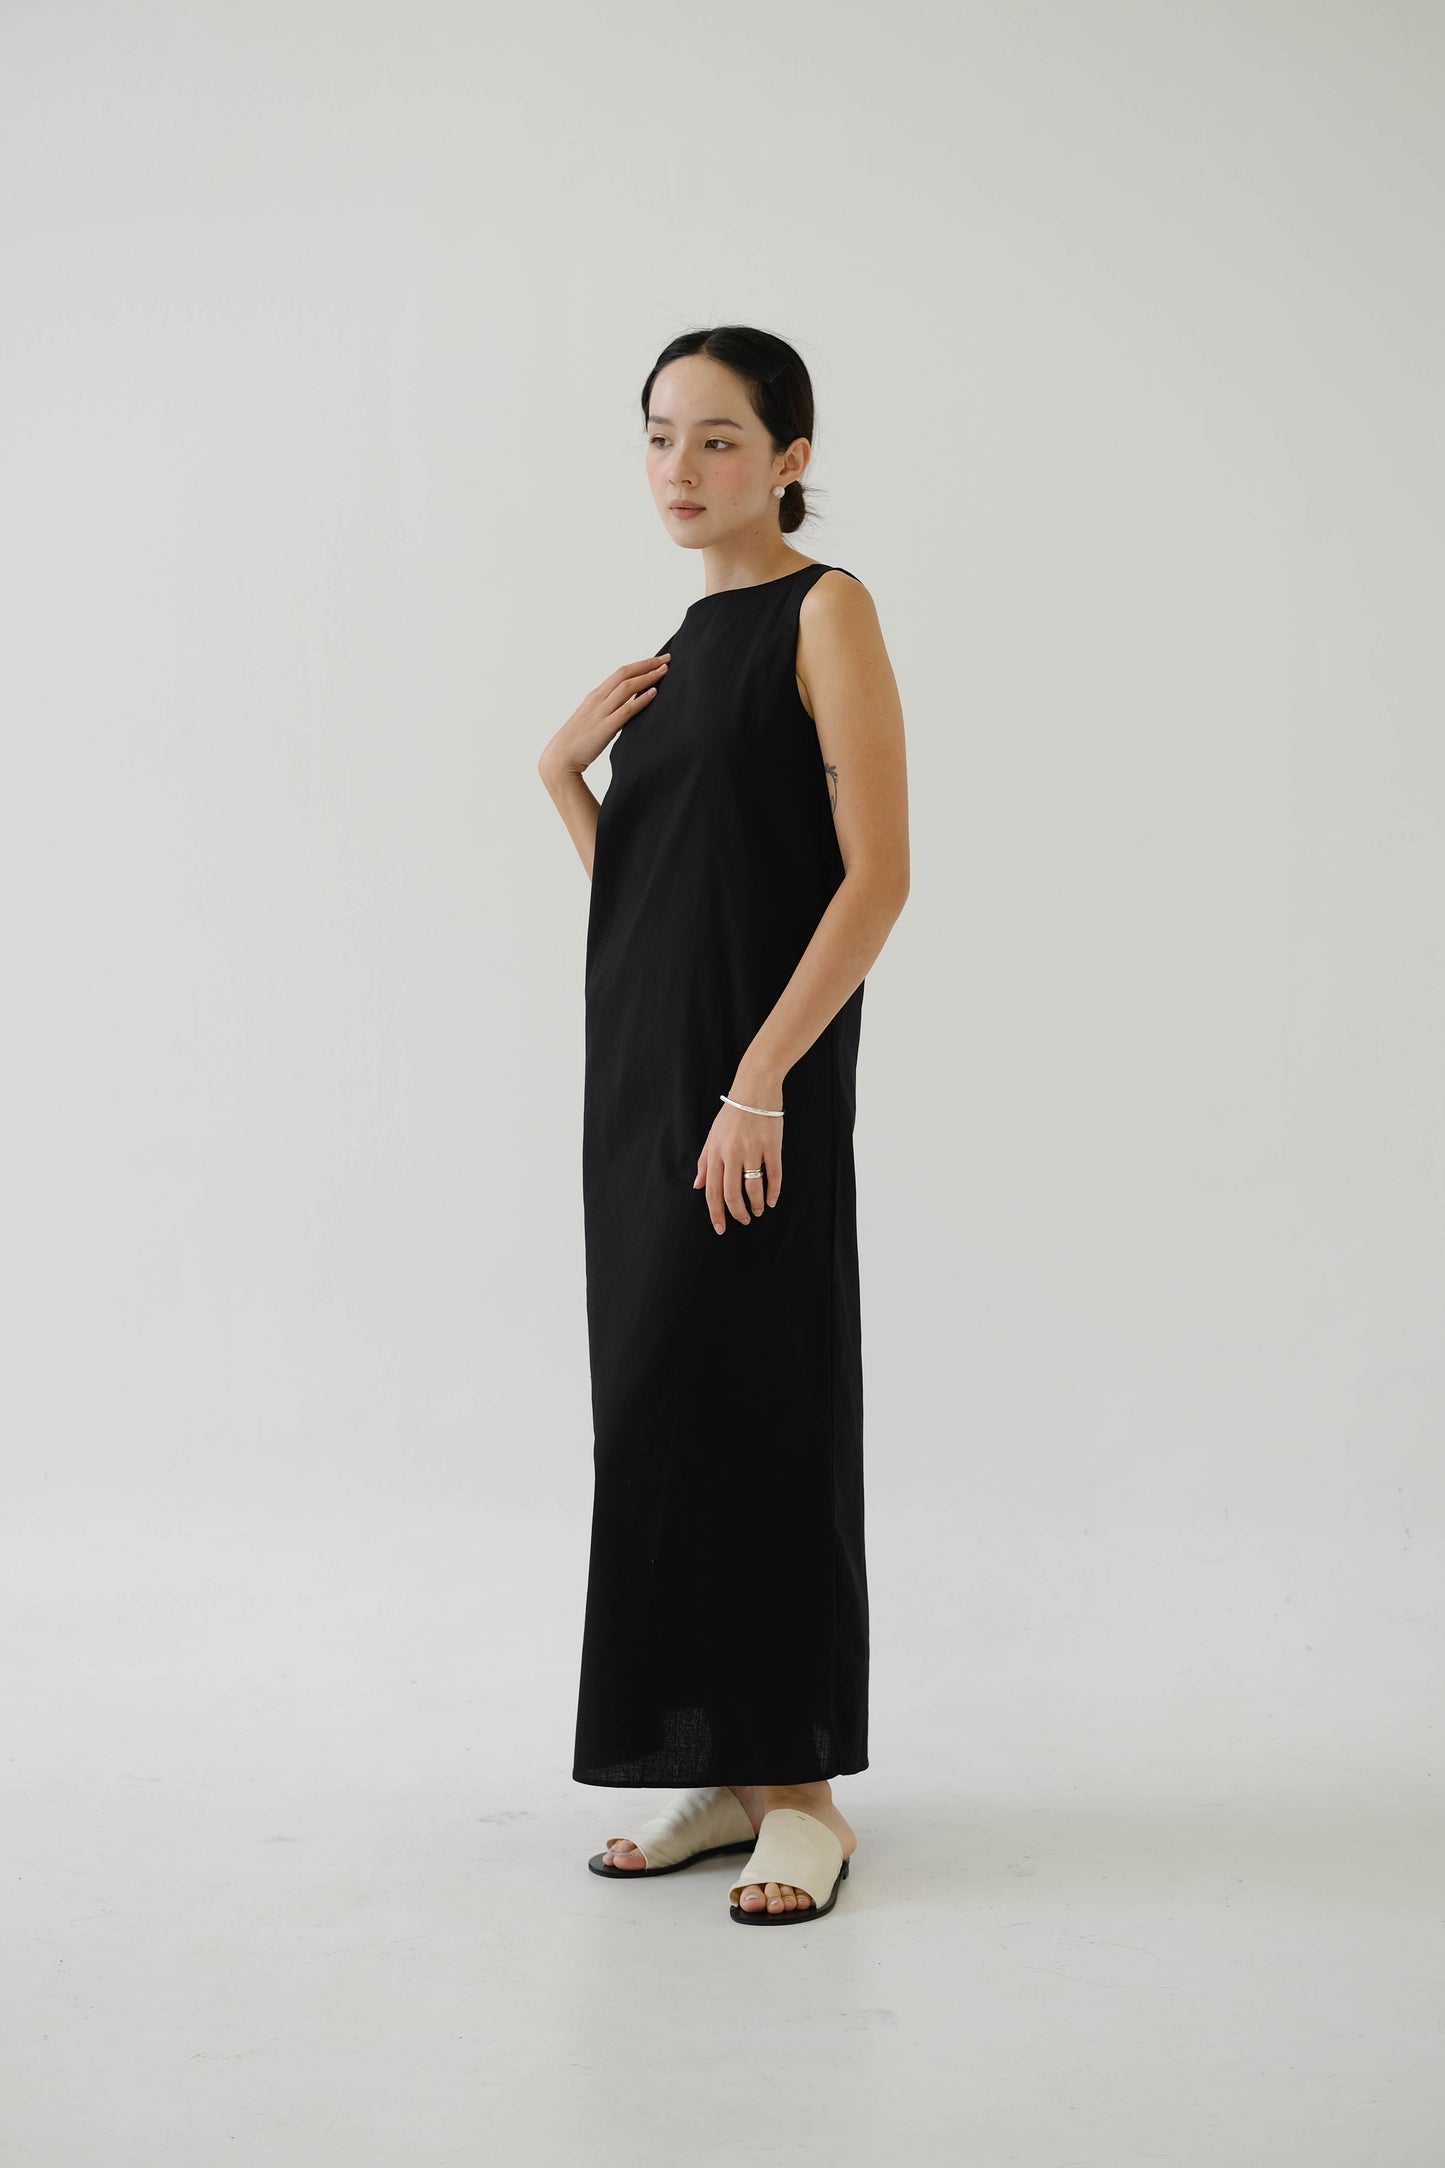 French cotton linen tank dress in classic black